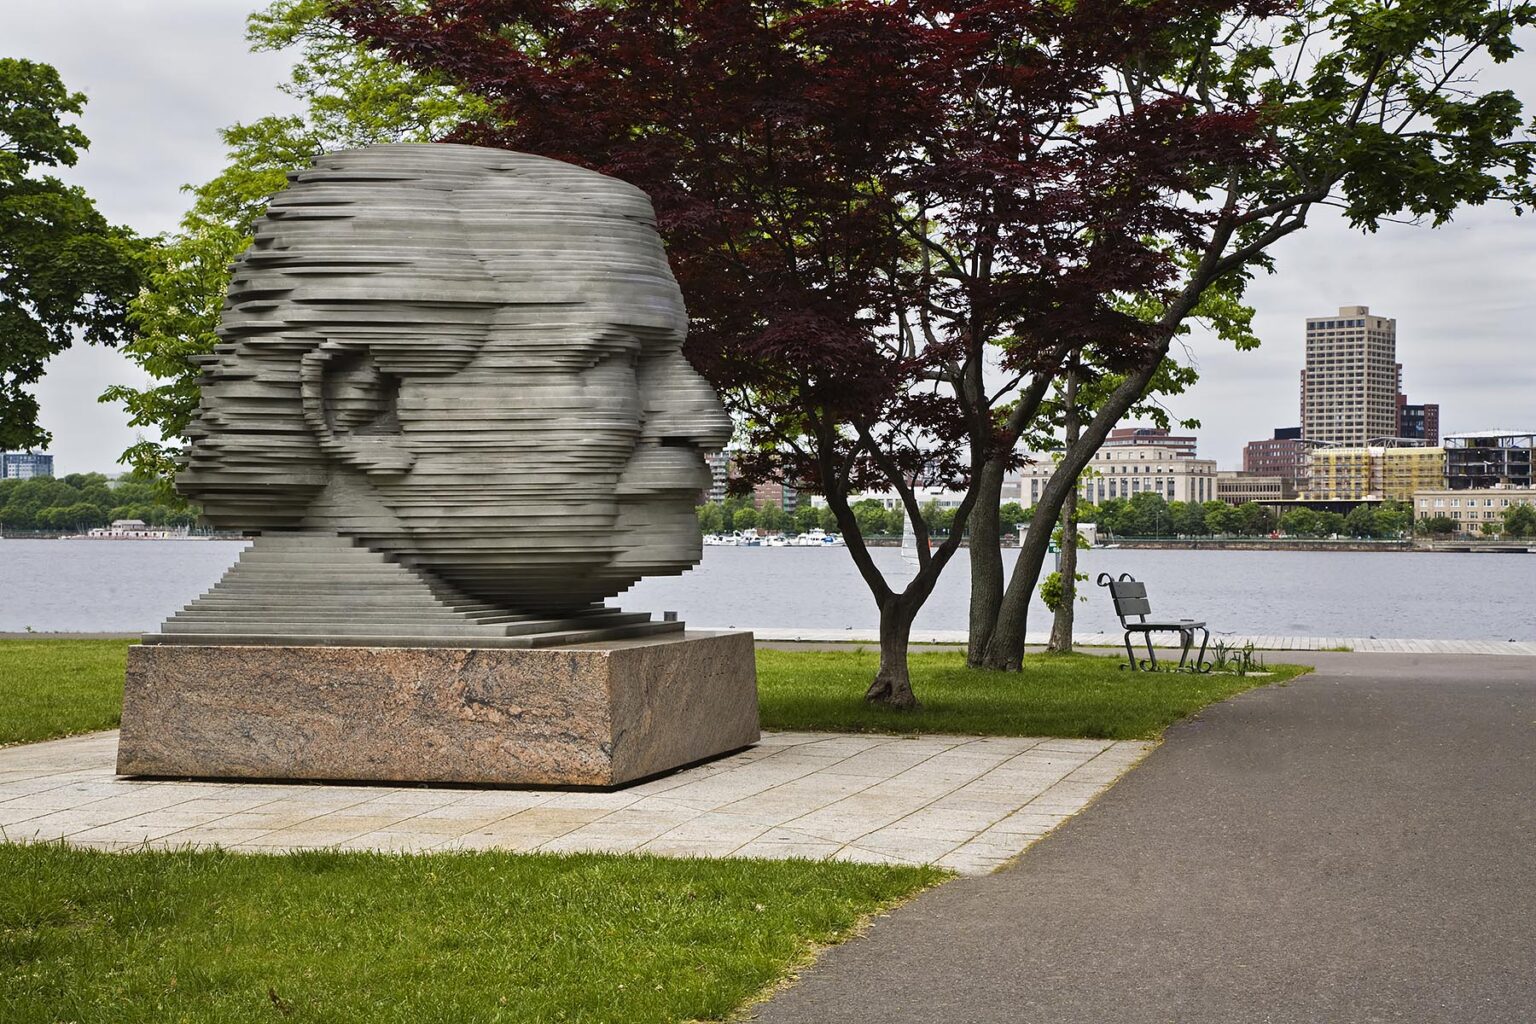 A statue of ARTHUR FIEDLER the conductor of the Boston Pops orchestra in CHARLES RIVER PARK - BOSTON, MASSACHUSETTS